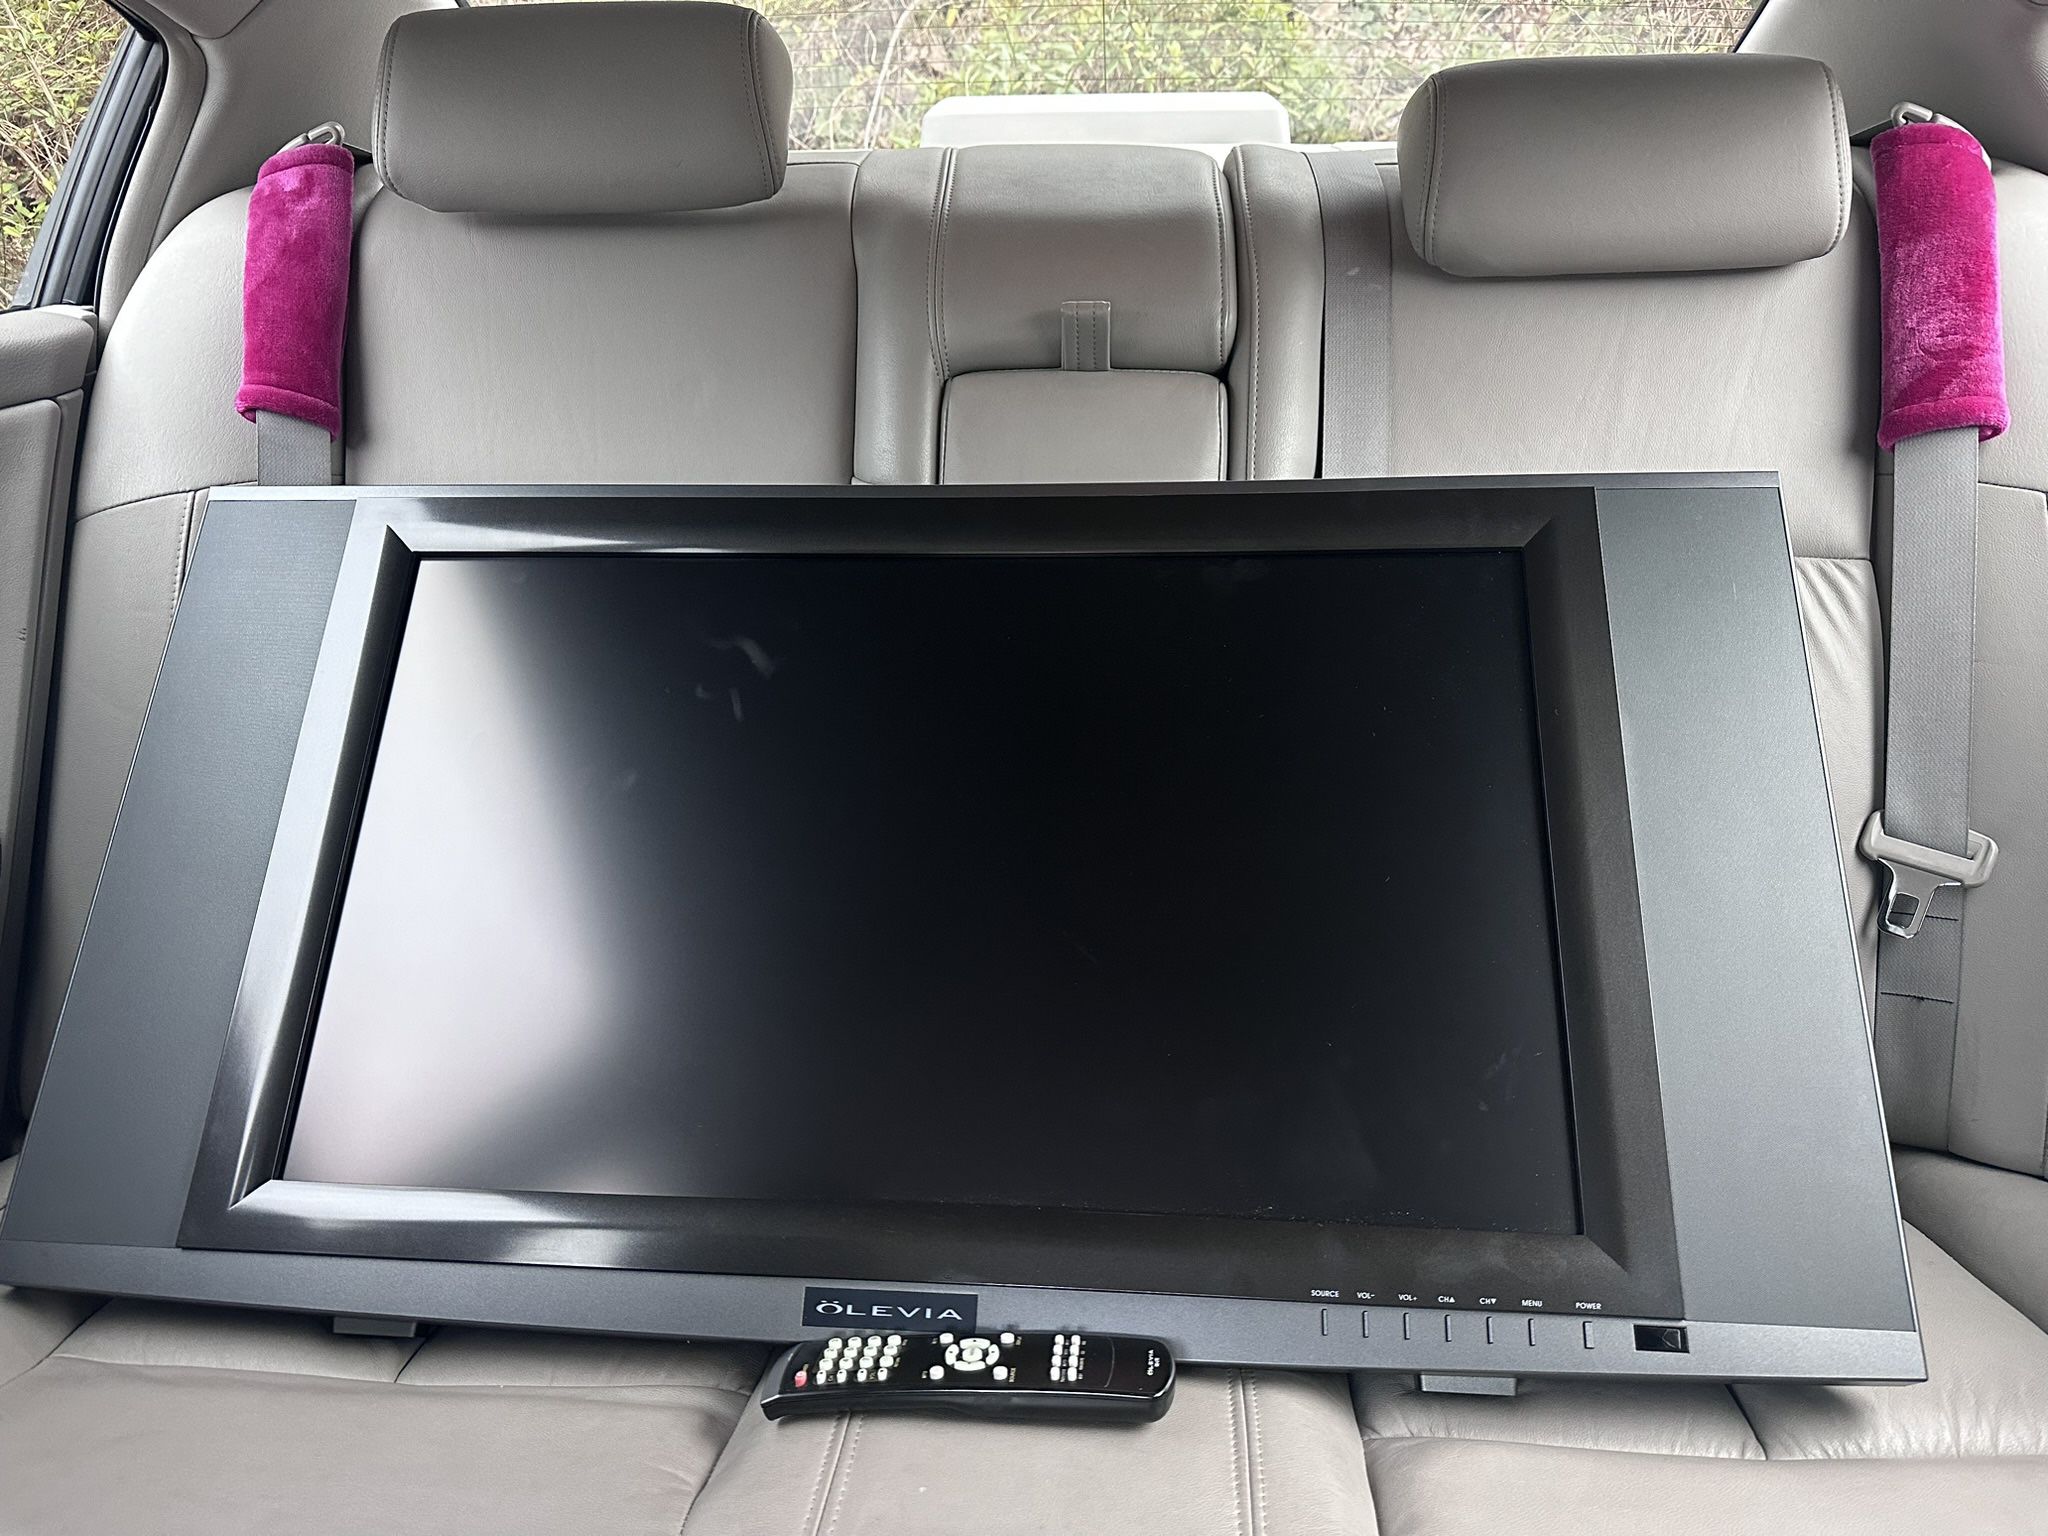 45” TV with Remote 